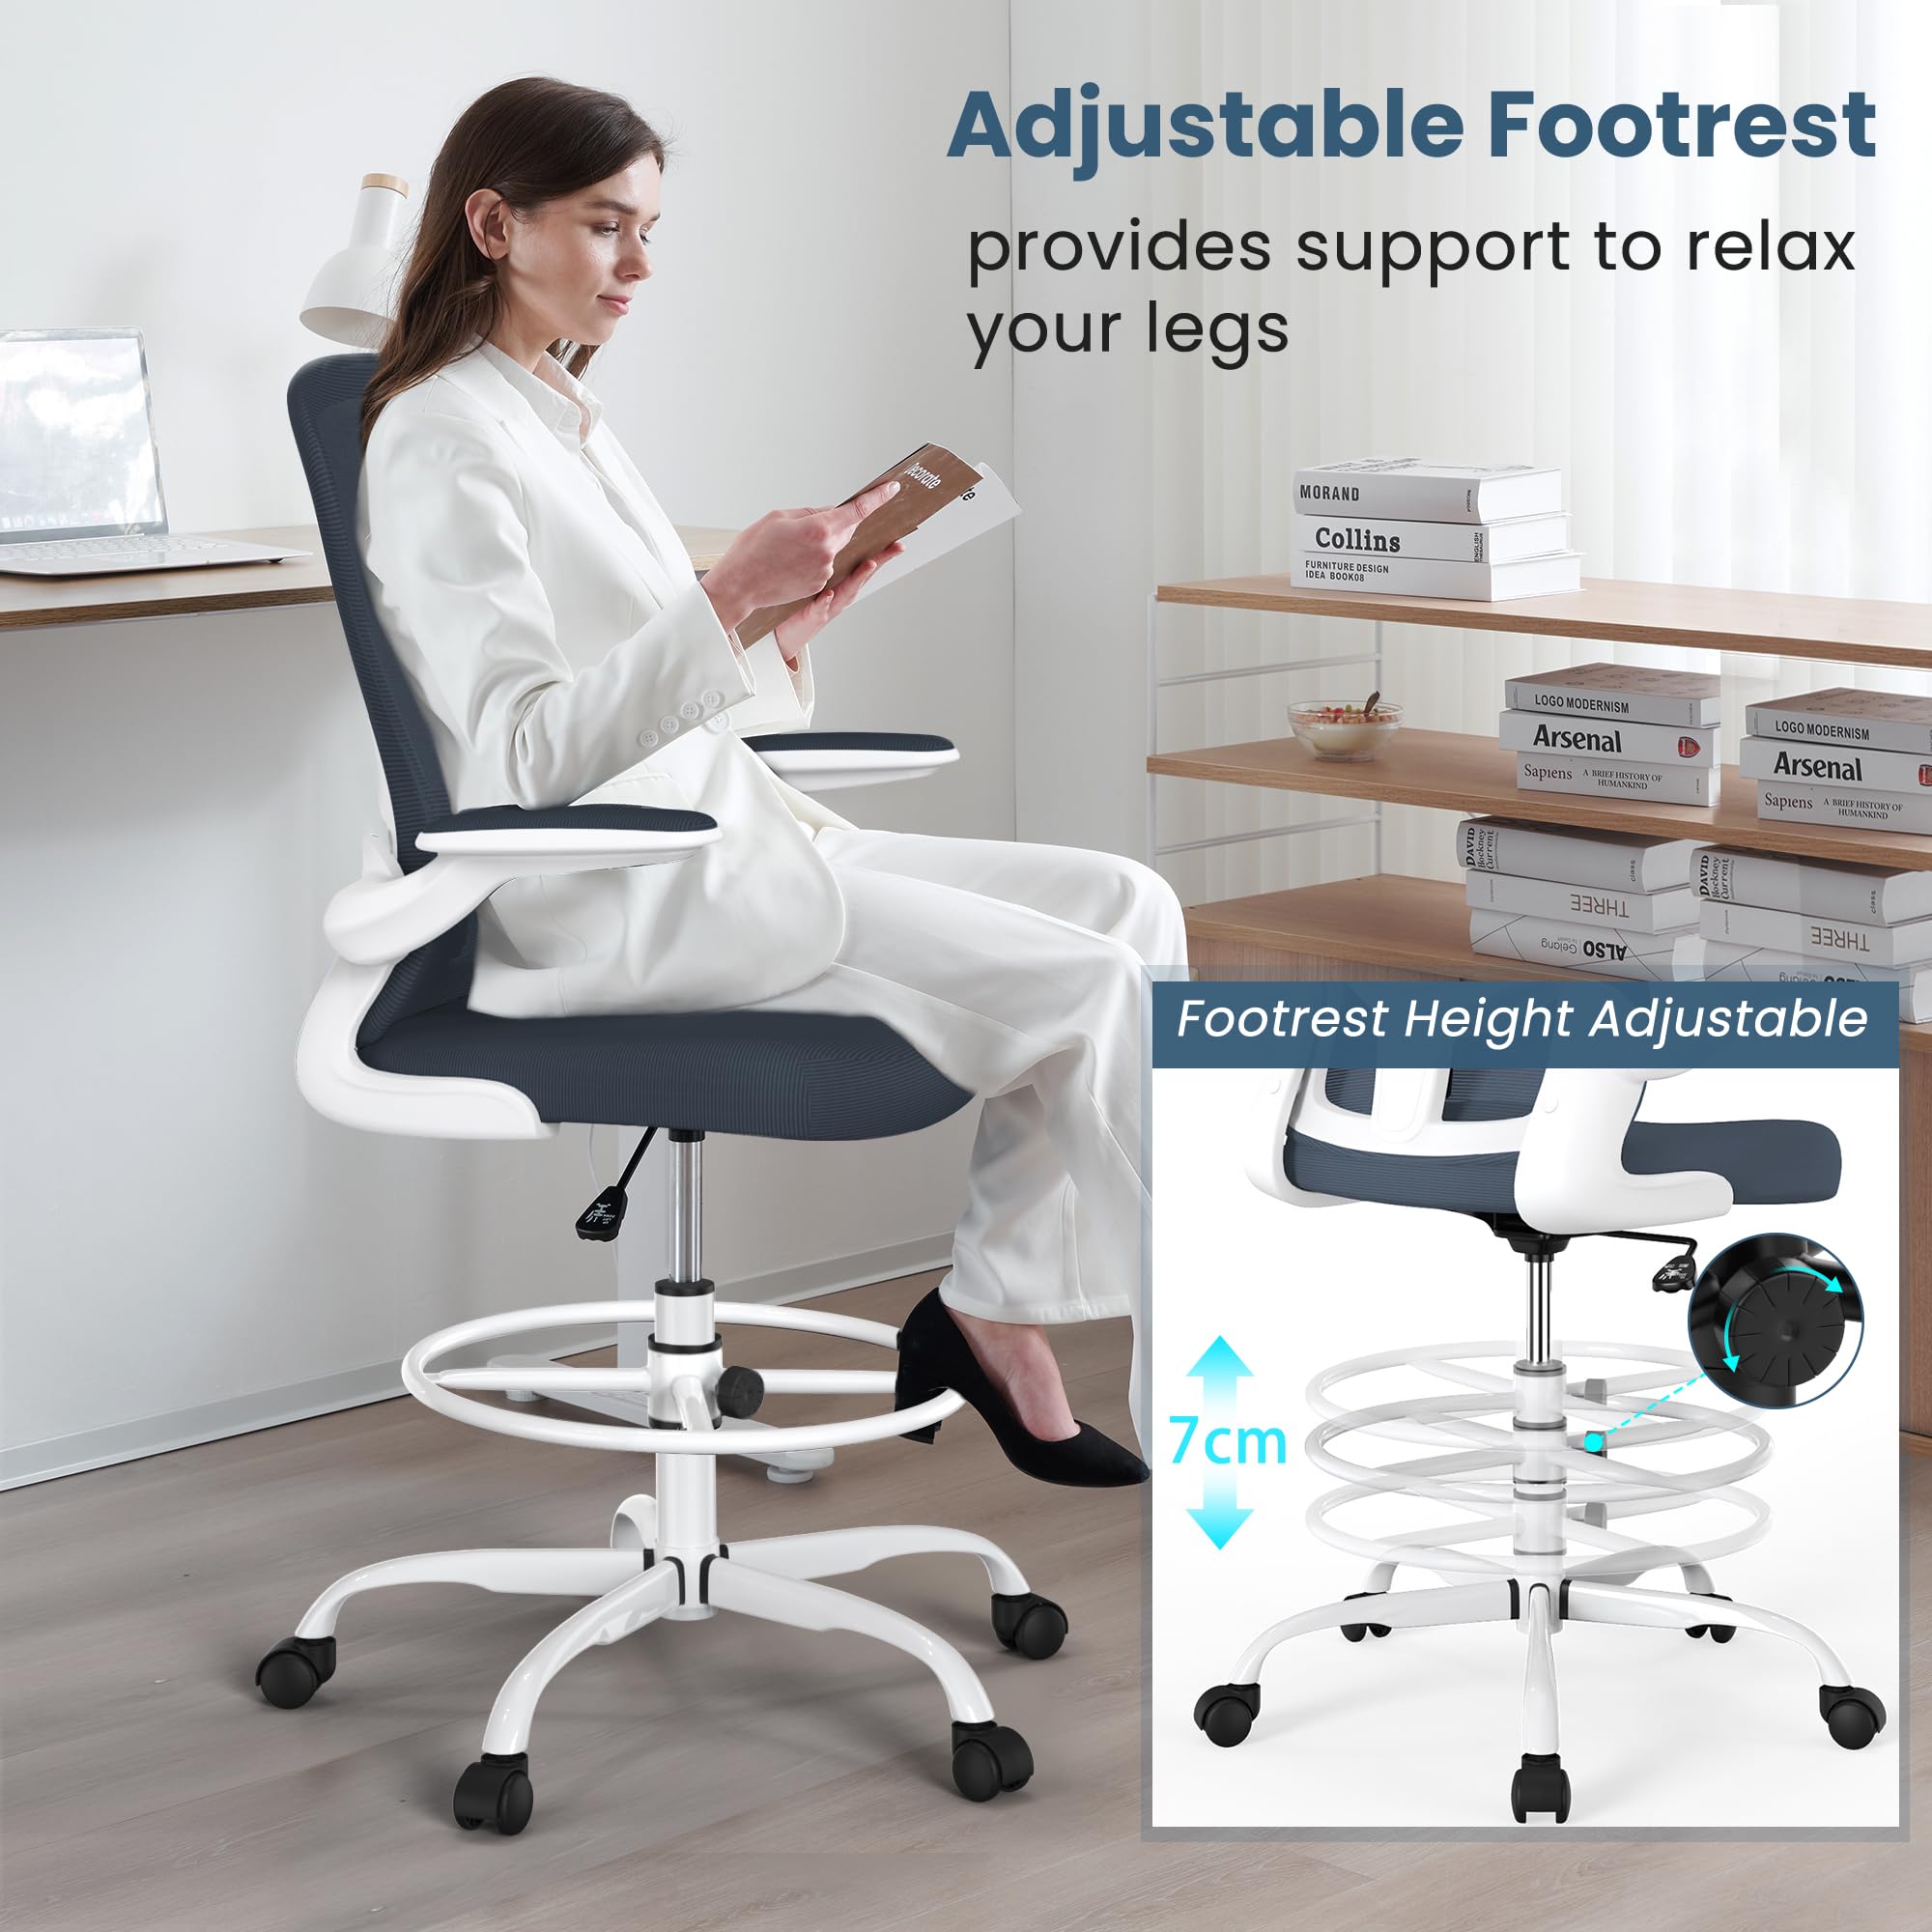 Drafting Chair, Tall Office Chair with Flip-up Armrests Executive Ergonomic Computer Standing Desk Chair, Office Drafting Chair with Lumbar Support and Adjustable Footrest Ring